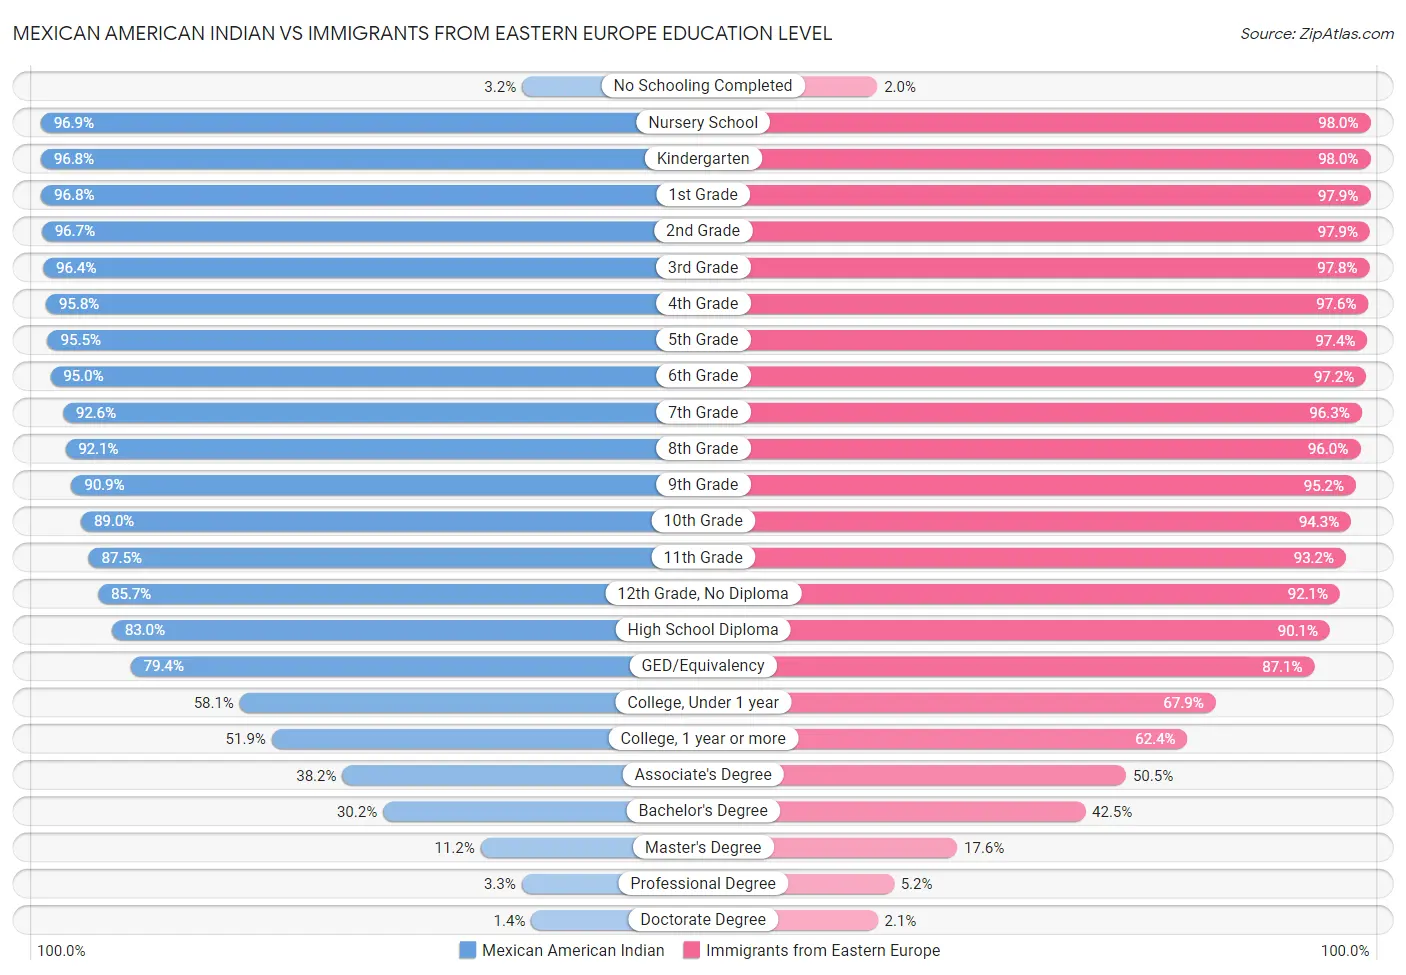 Mexican American Indian vs Immigrants from Eastern Europe Education Level